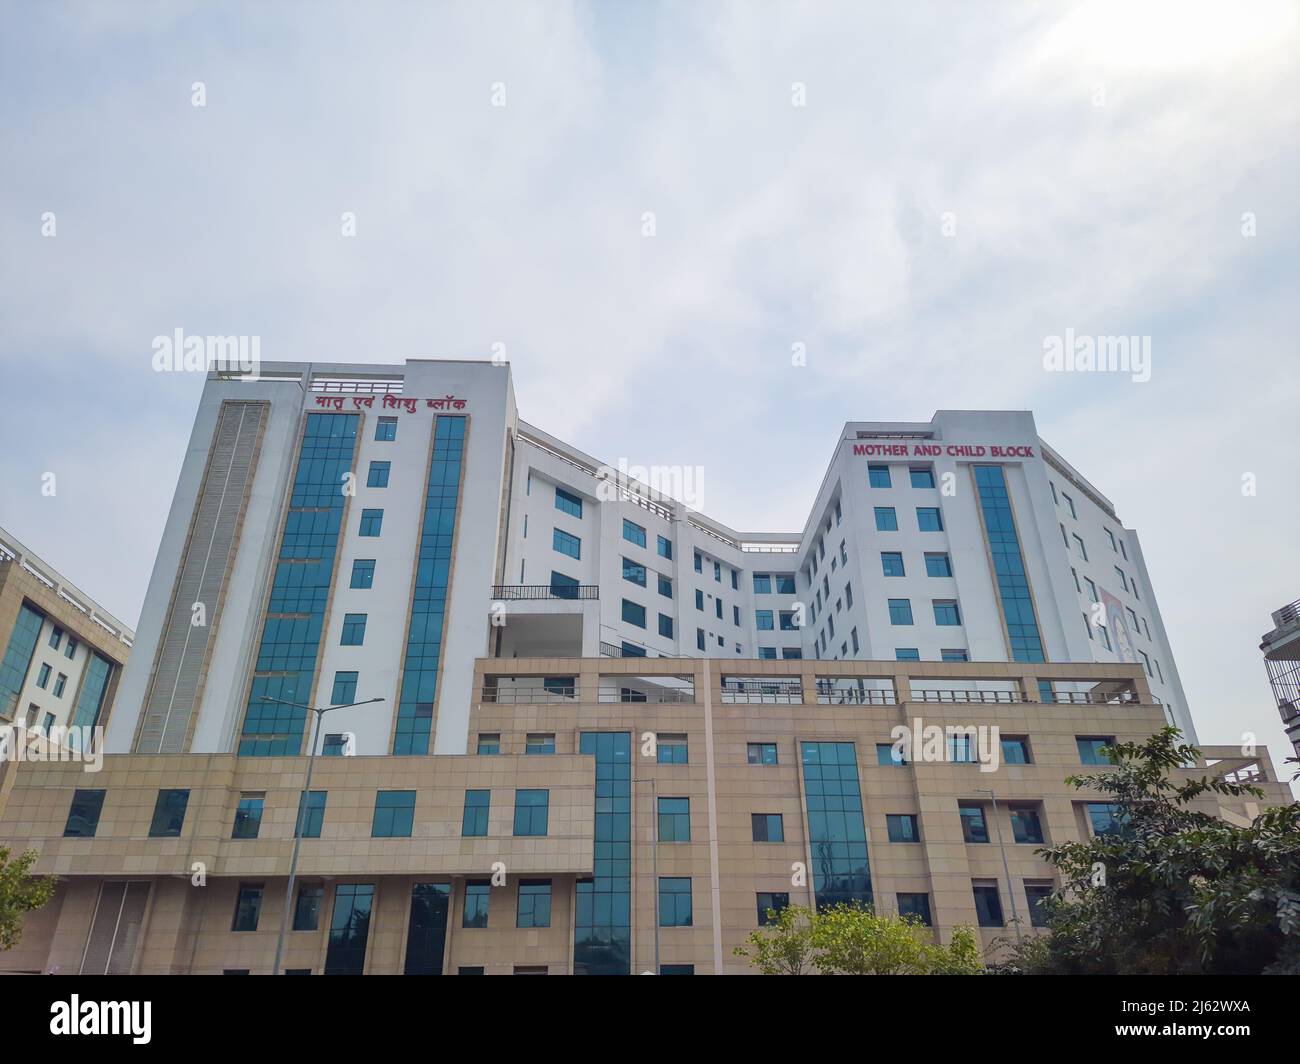 hospital multistory building with cloudy sky at morning image is taken at aiims delhi india on Apr 14 2022. Stock Photo